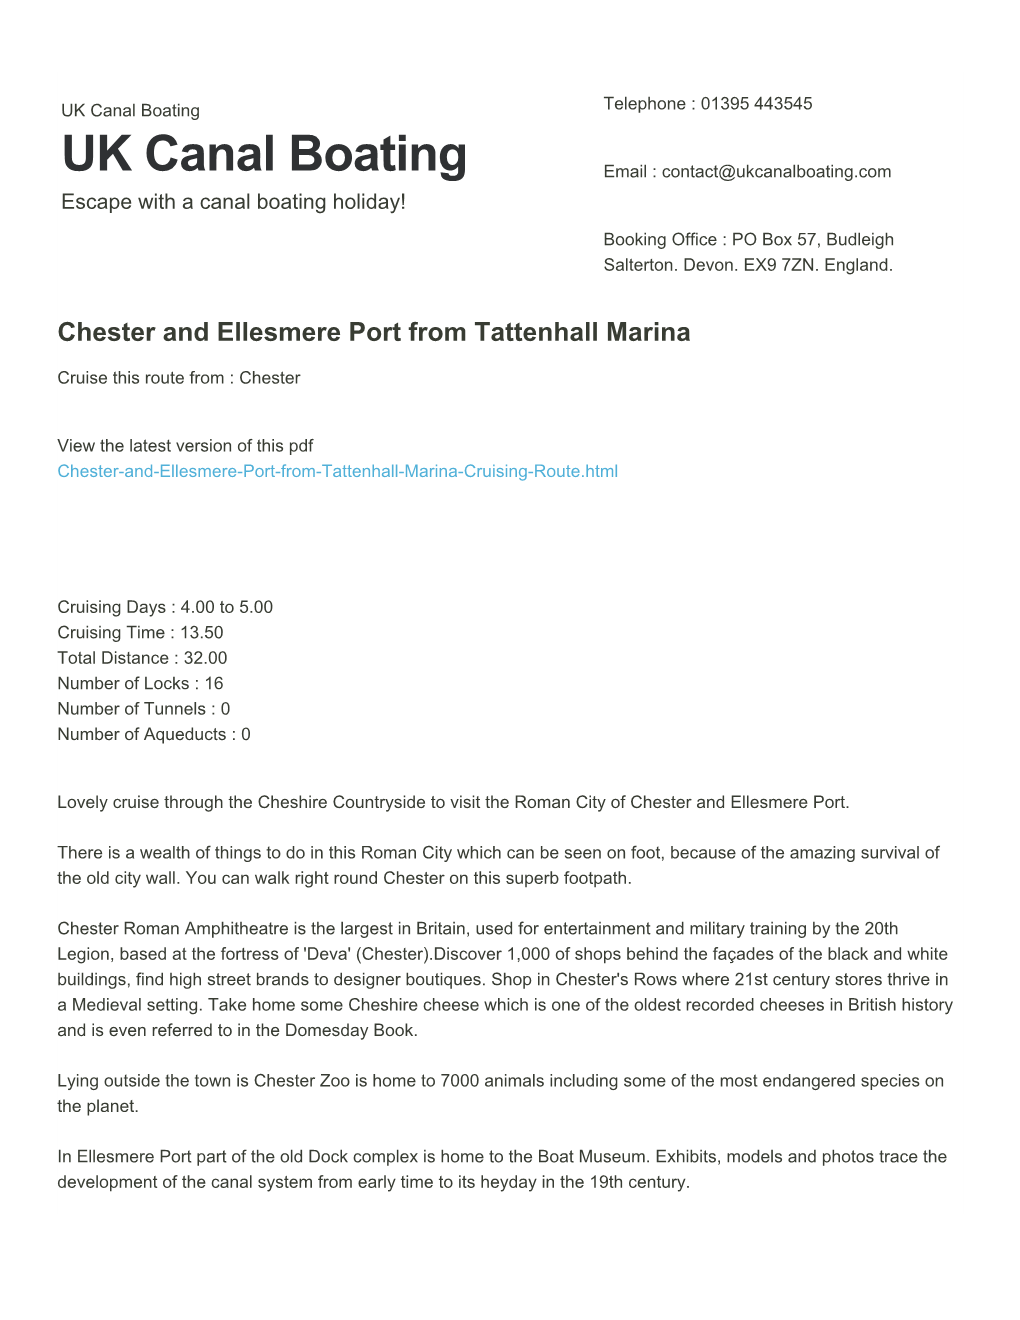 Chester and Ellesmere Port from Tattenhall Marina | UK Canal Boating